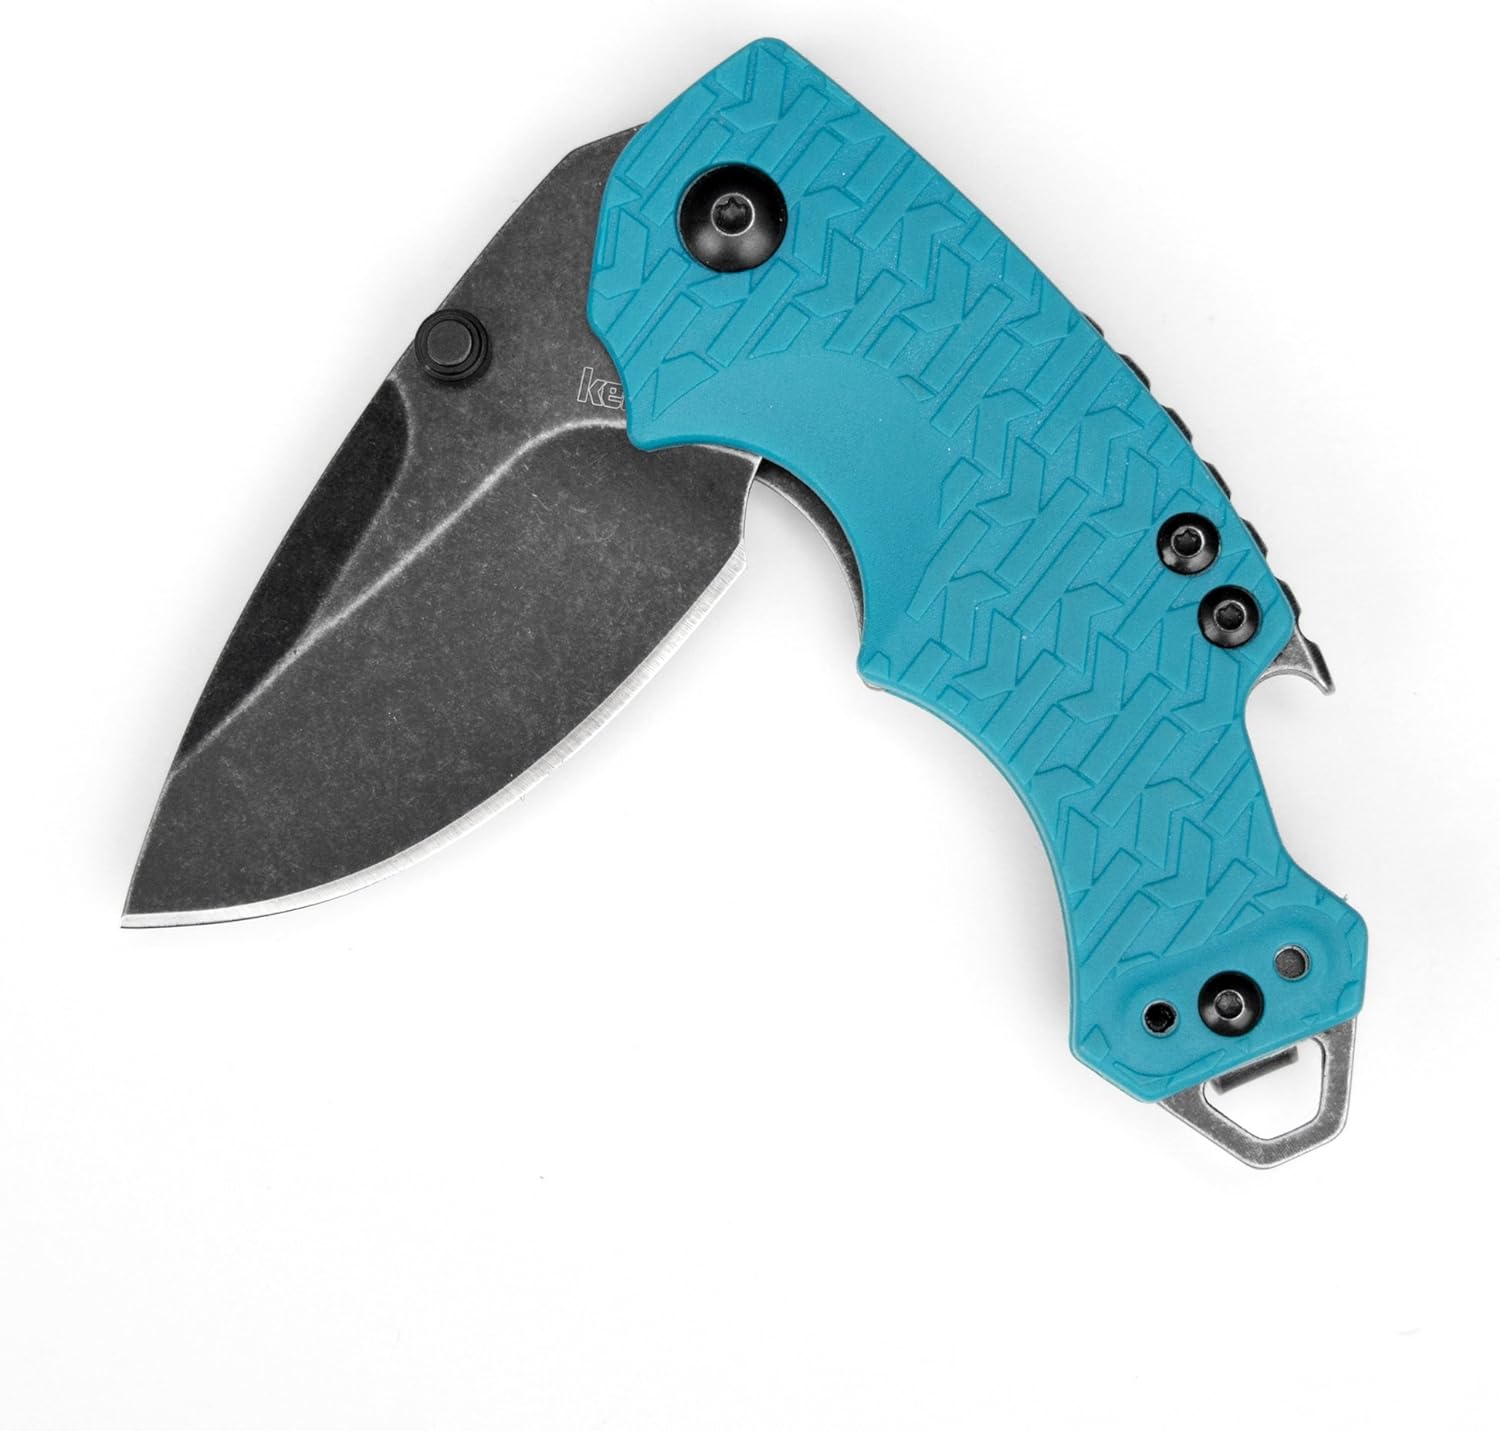 Kershaw Shuffle Folding Pocket Knife, Compact Utility and Multi-Function Every Day Carry, Multiple Styles